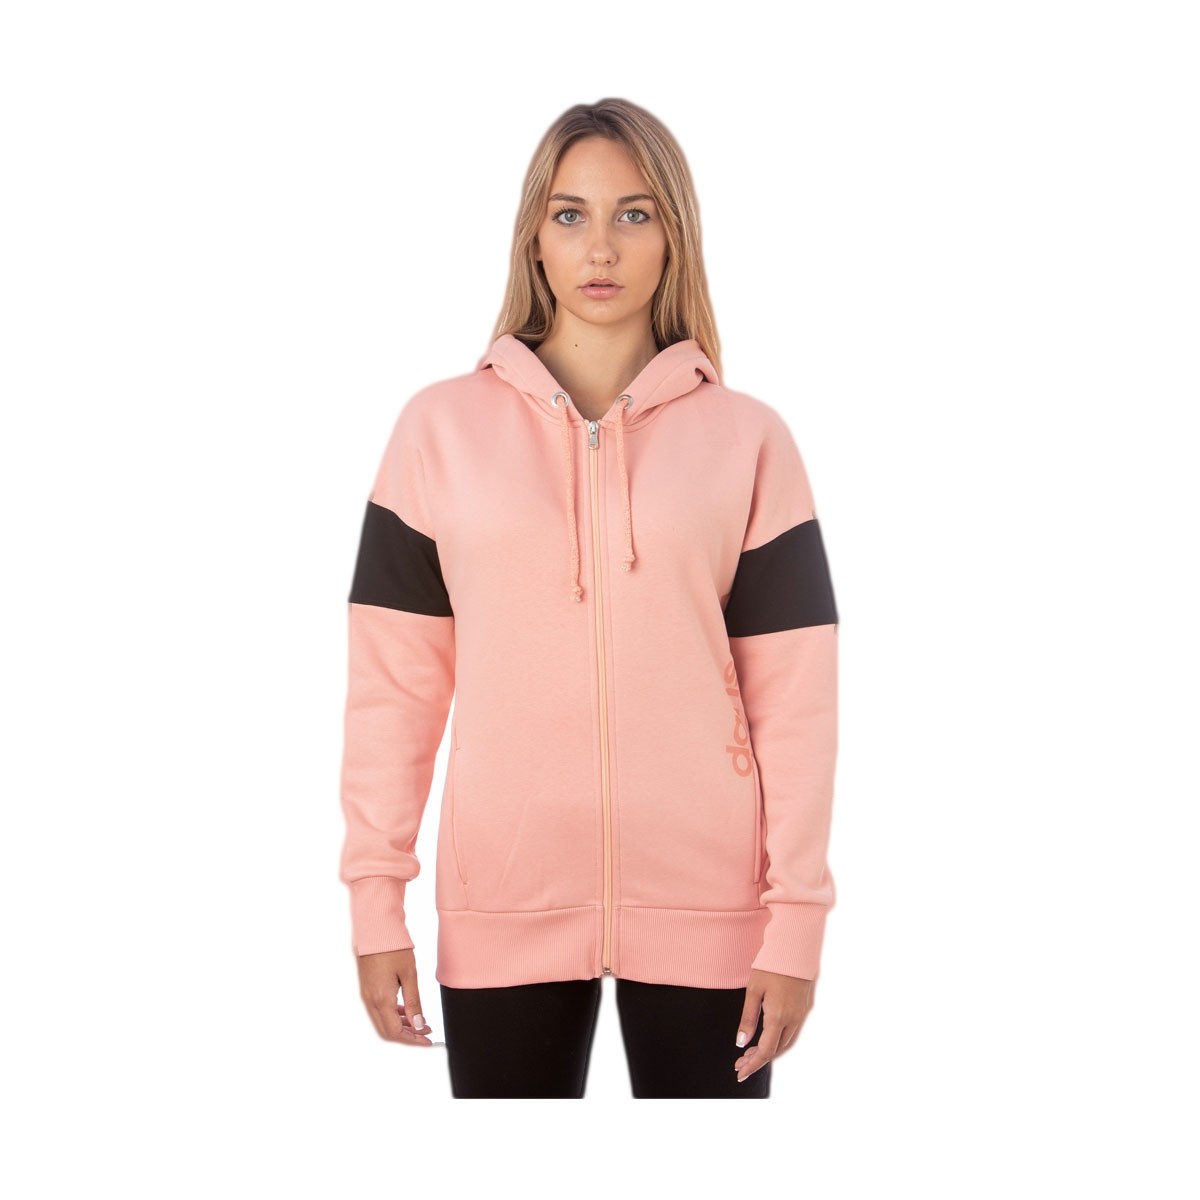 TWO-COLOR WOMEN'S JACKET